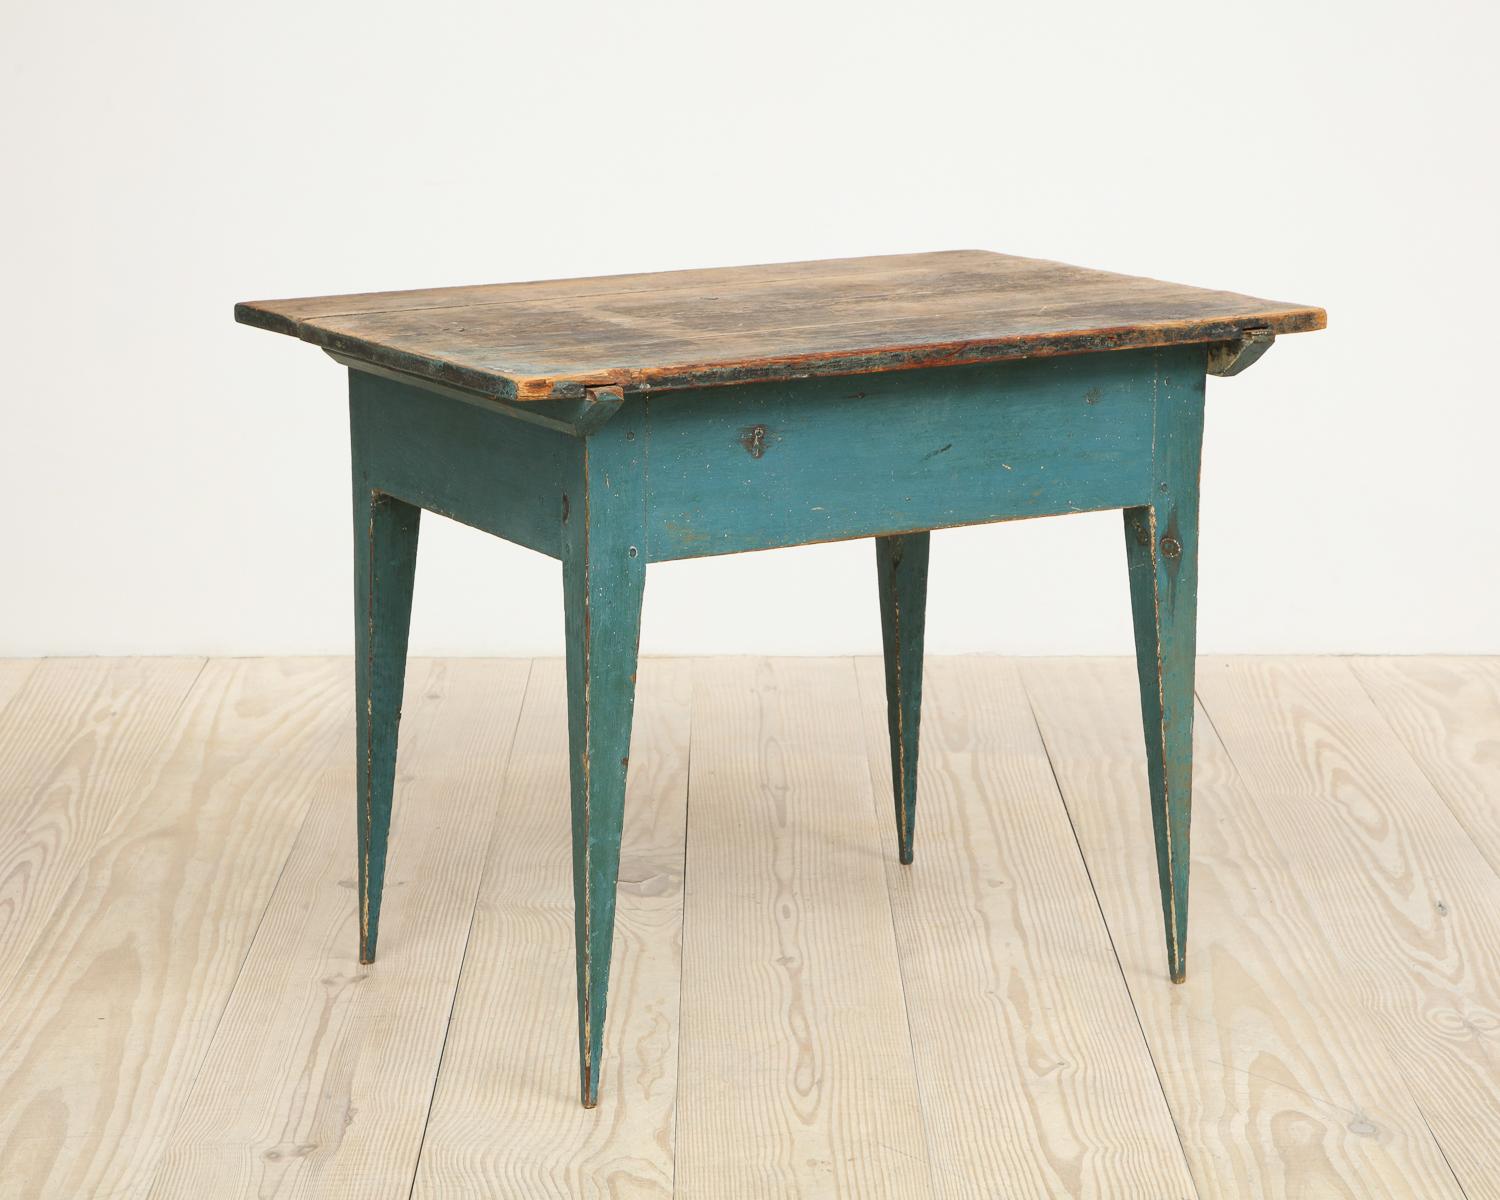 18th Century and Earlier Gustavian Swedish Table with Drawer with Original Blue Paint, circa 1790